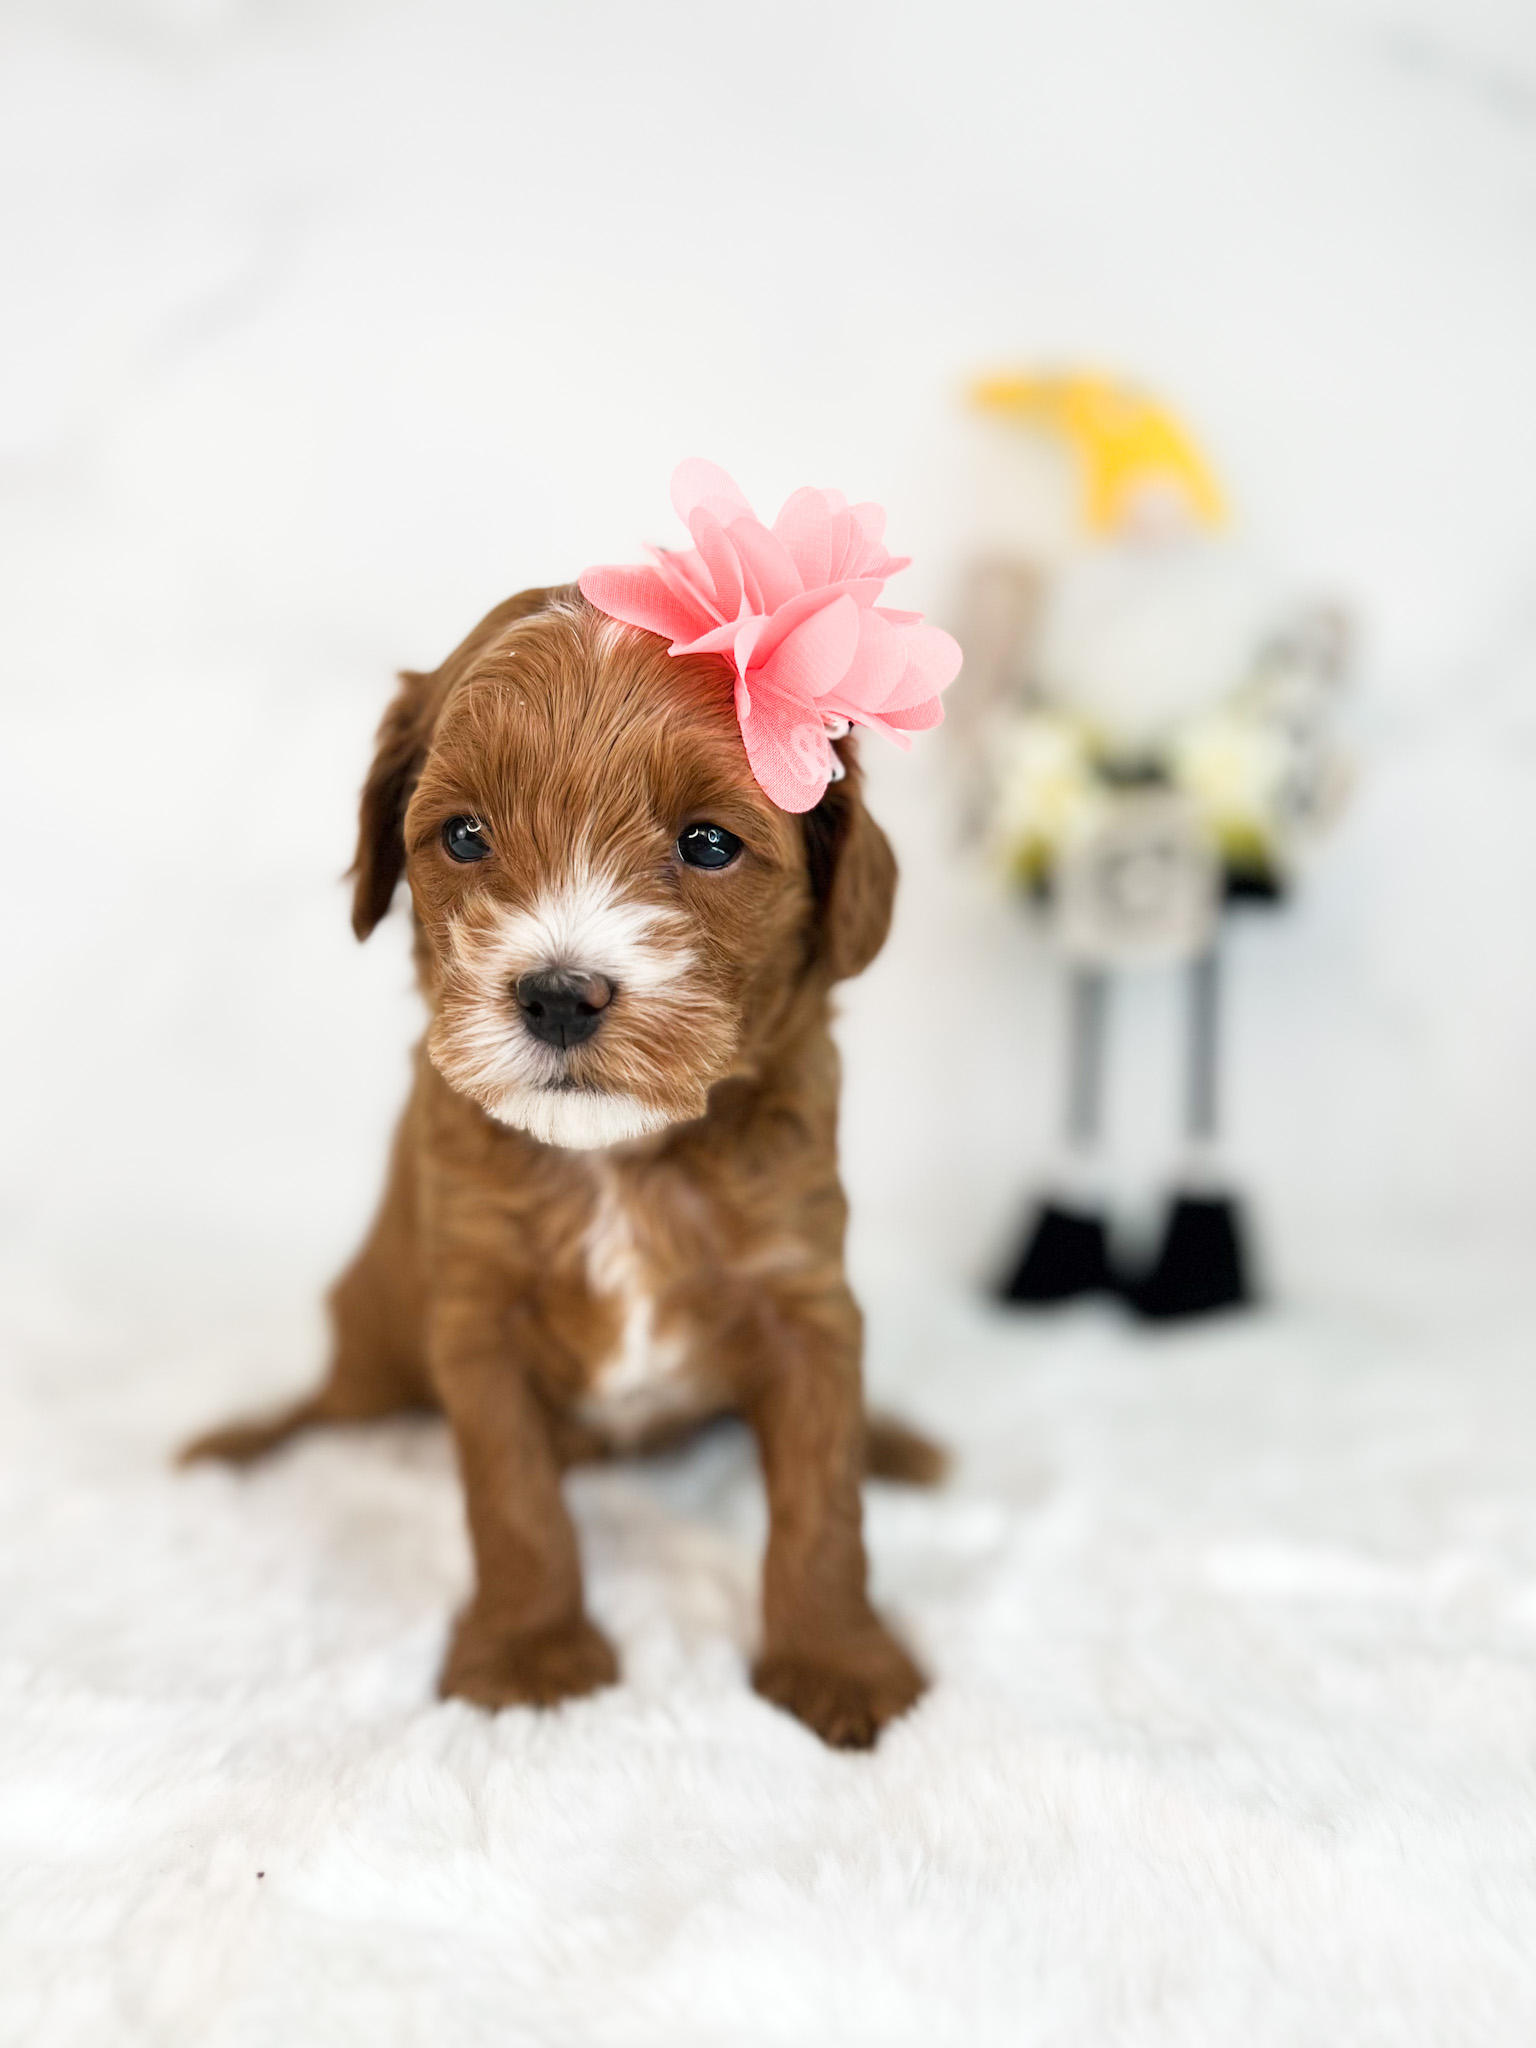 A tiny brown puppy with a delicate pink flower adorning its fur.